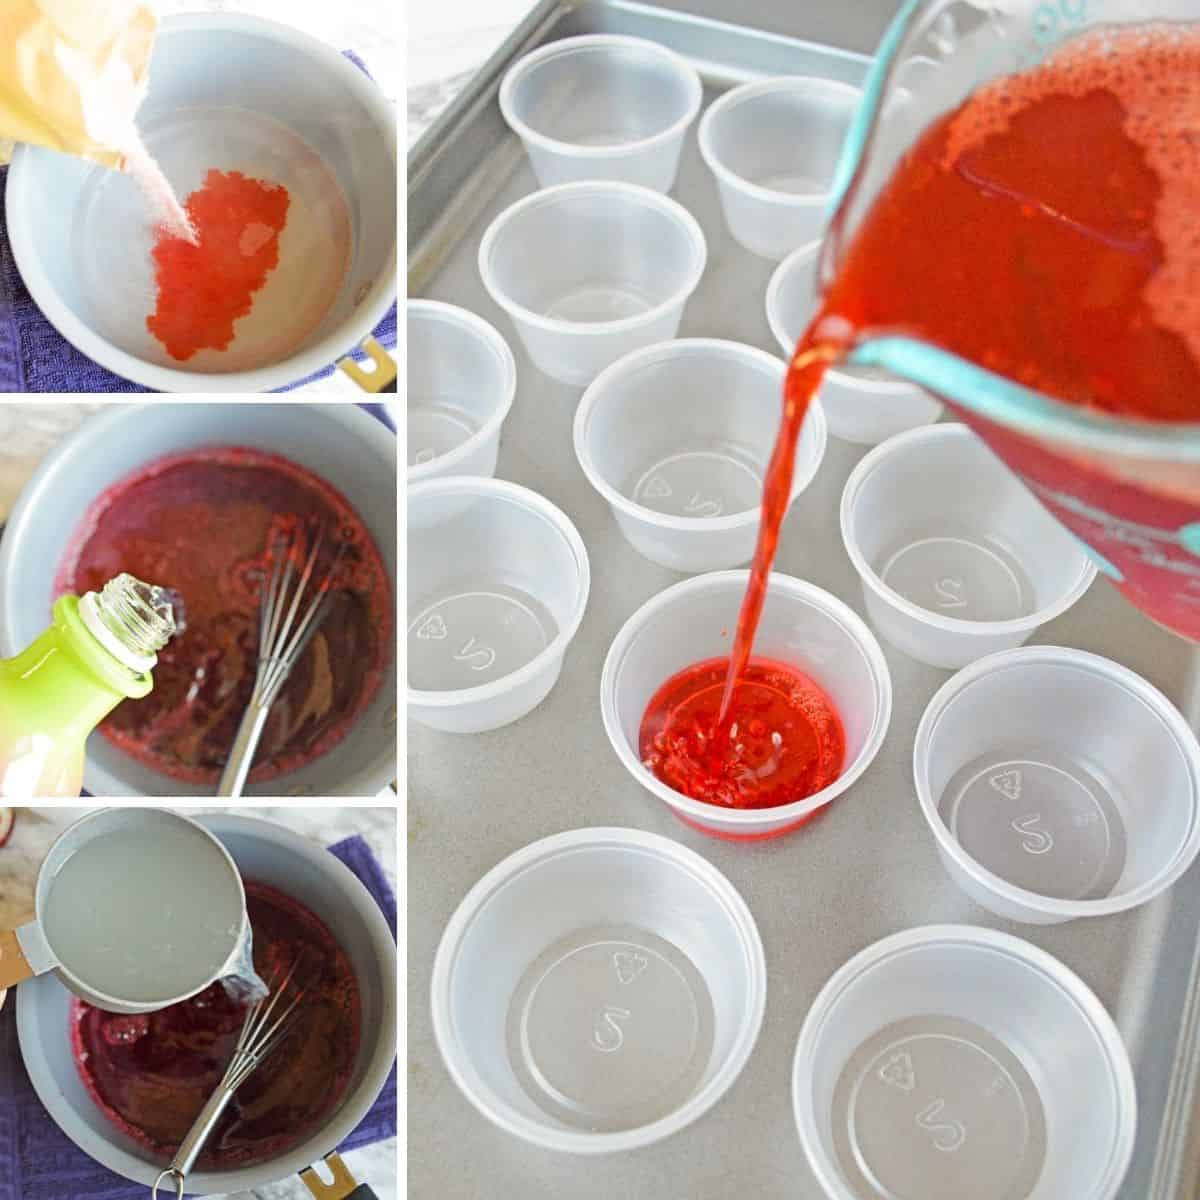 4 image collage of jello mix being added to bowl, vodka being added, limeade being added, and then the red jello mixture being poured into dmall plastic cups on a sheet pan.